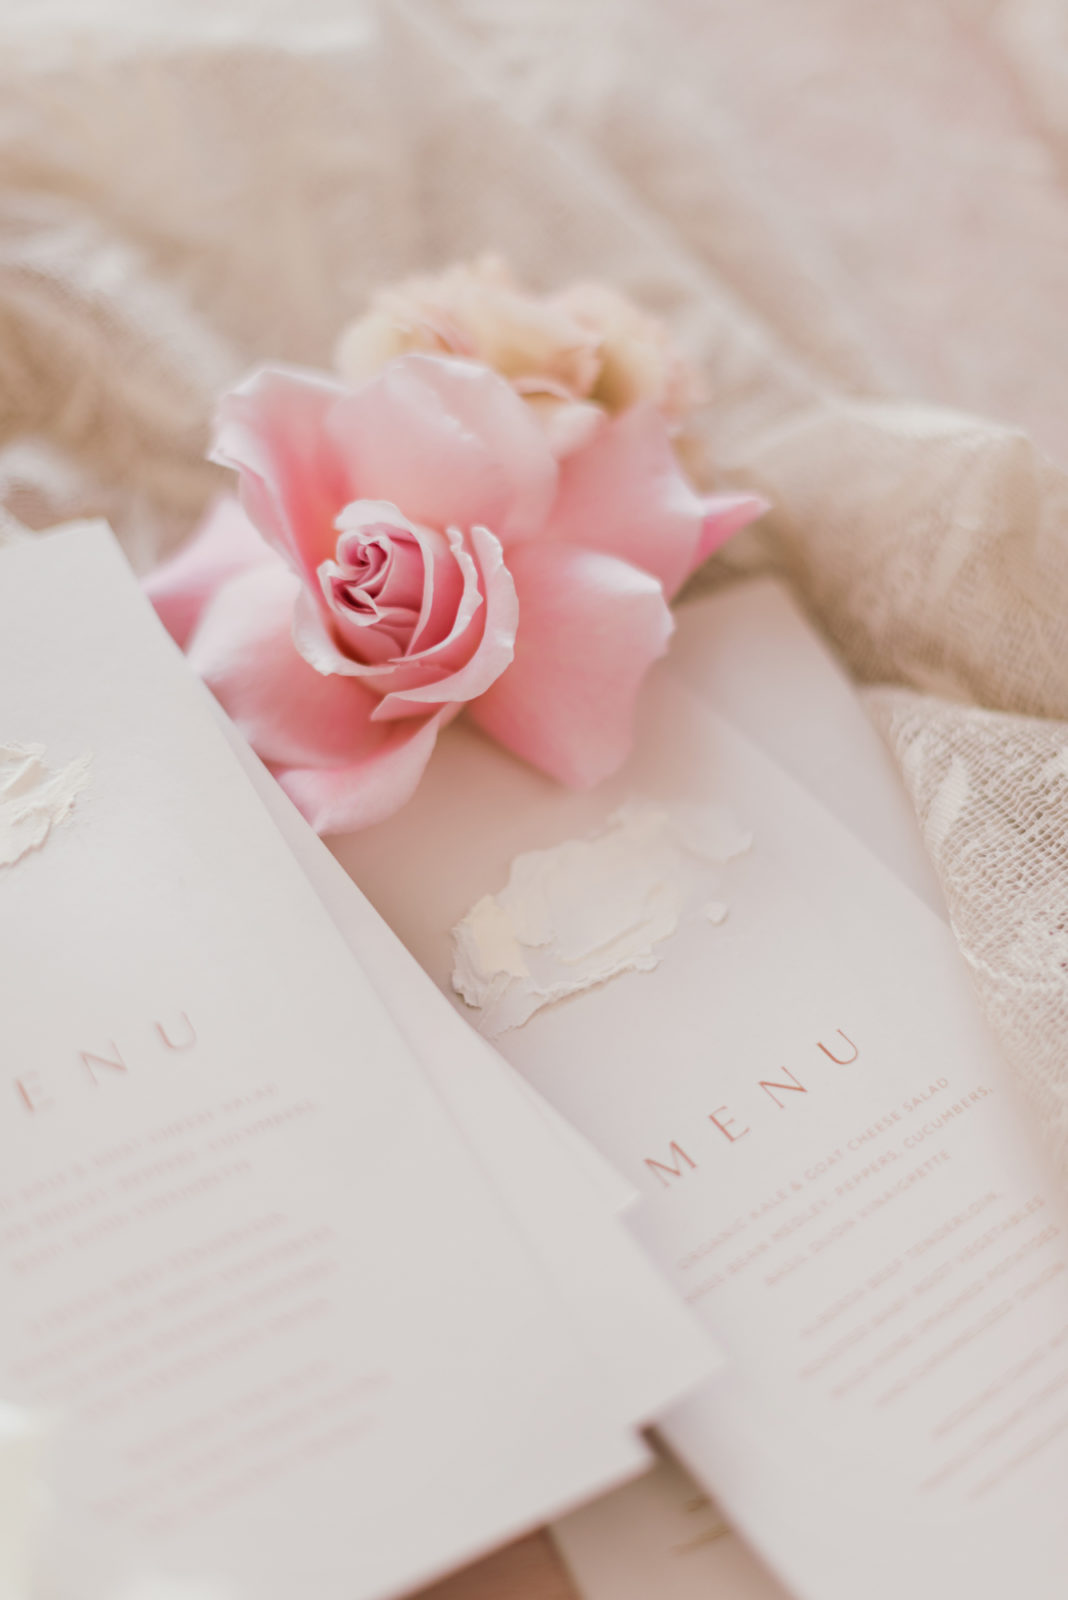 Delicate white and pink wedding stationery inspiration